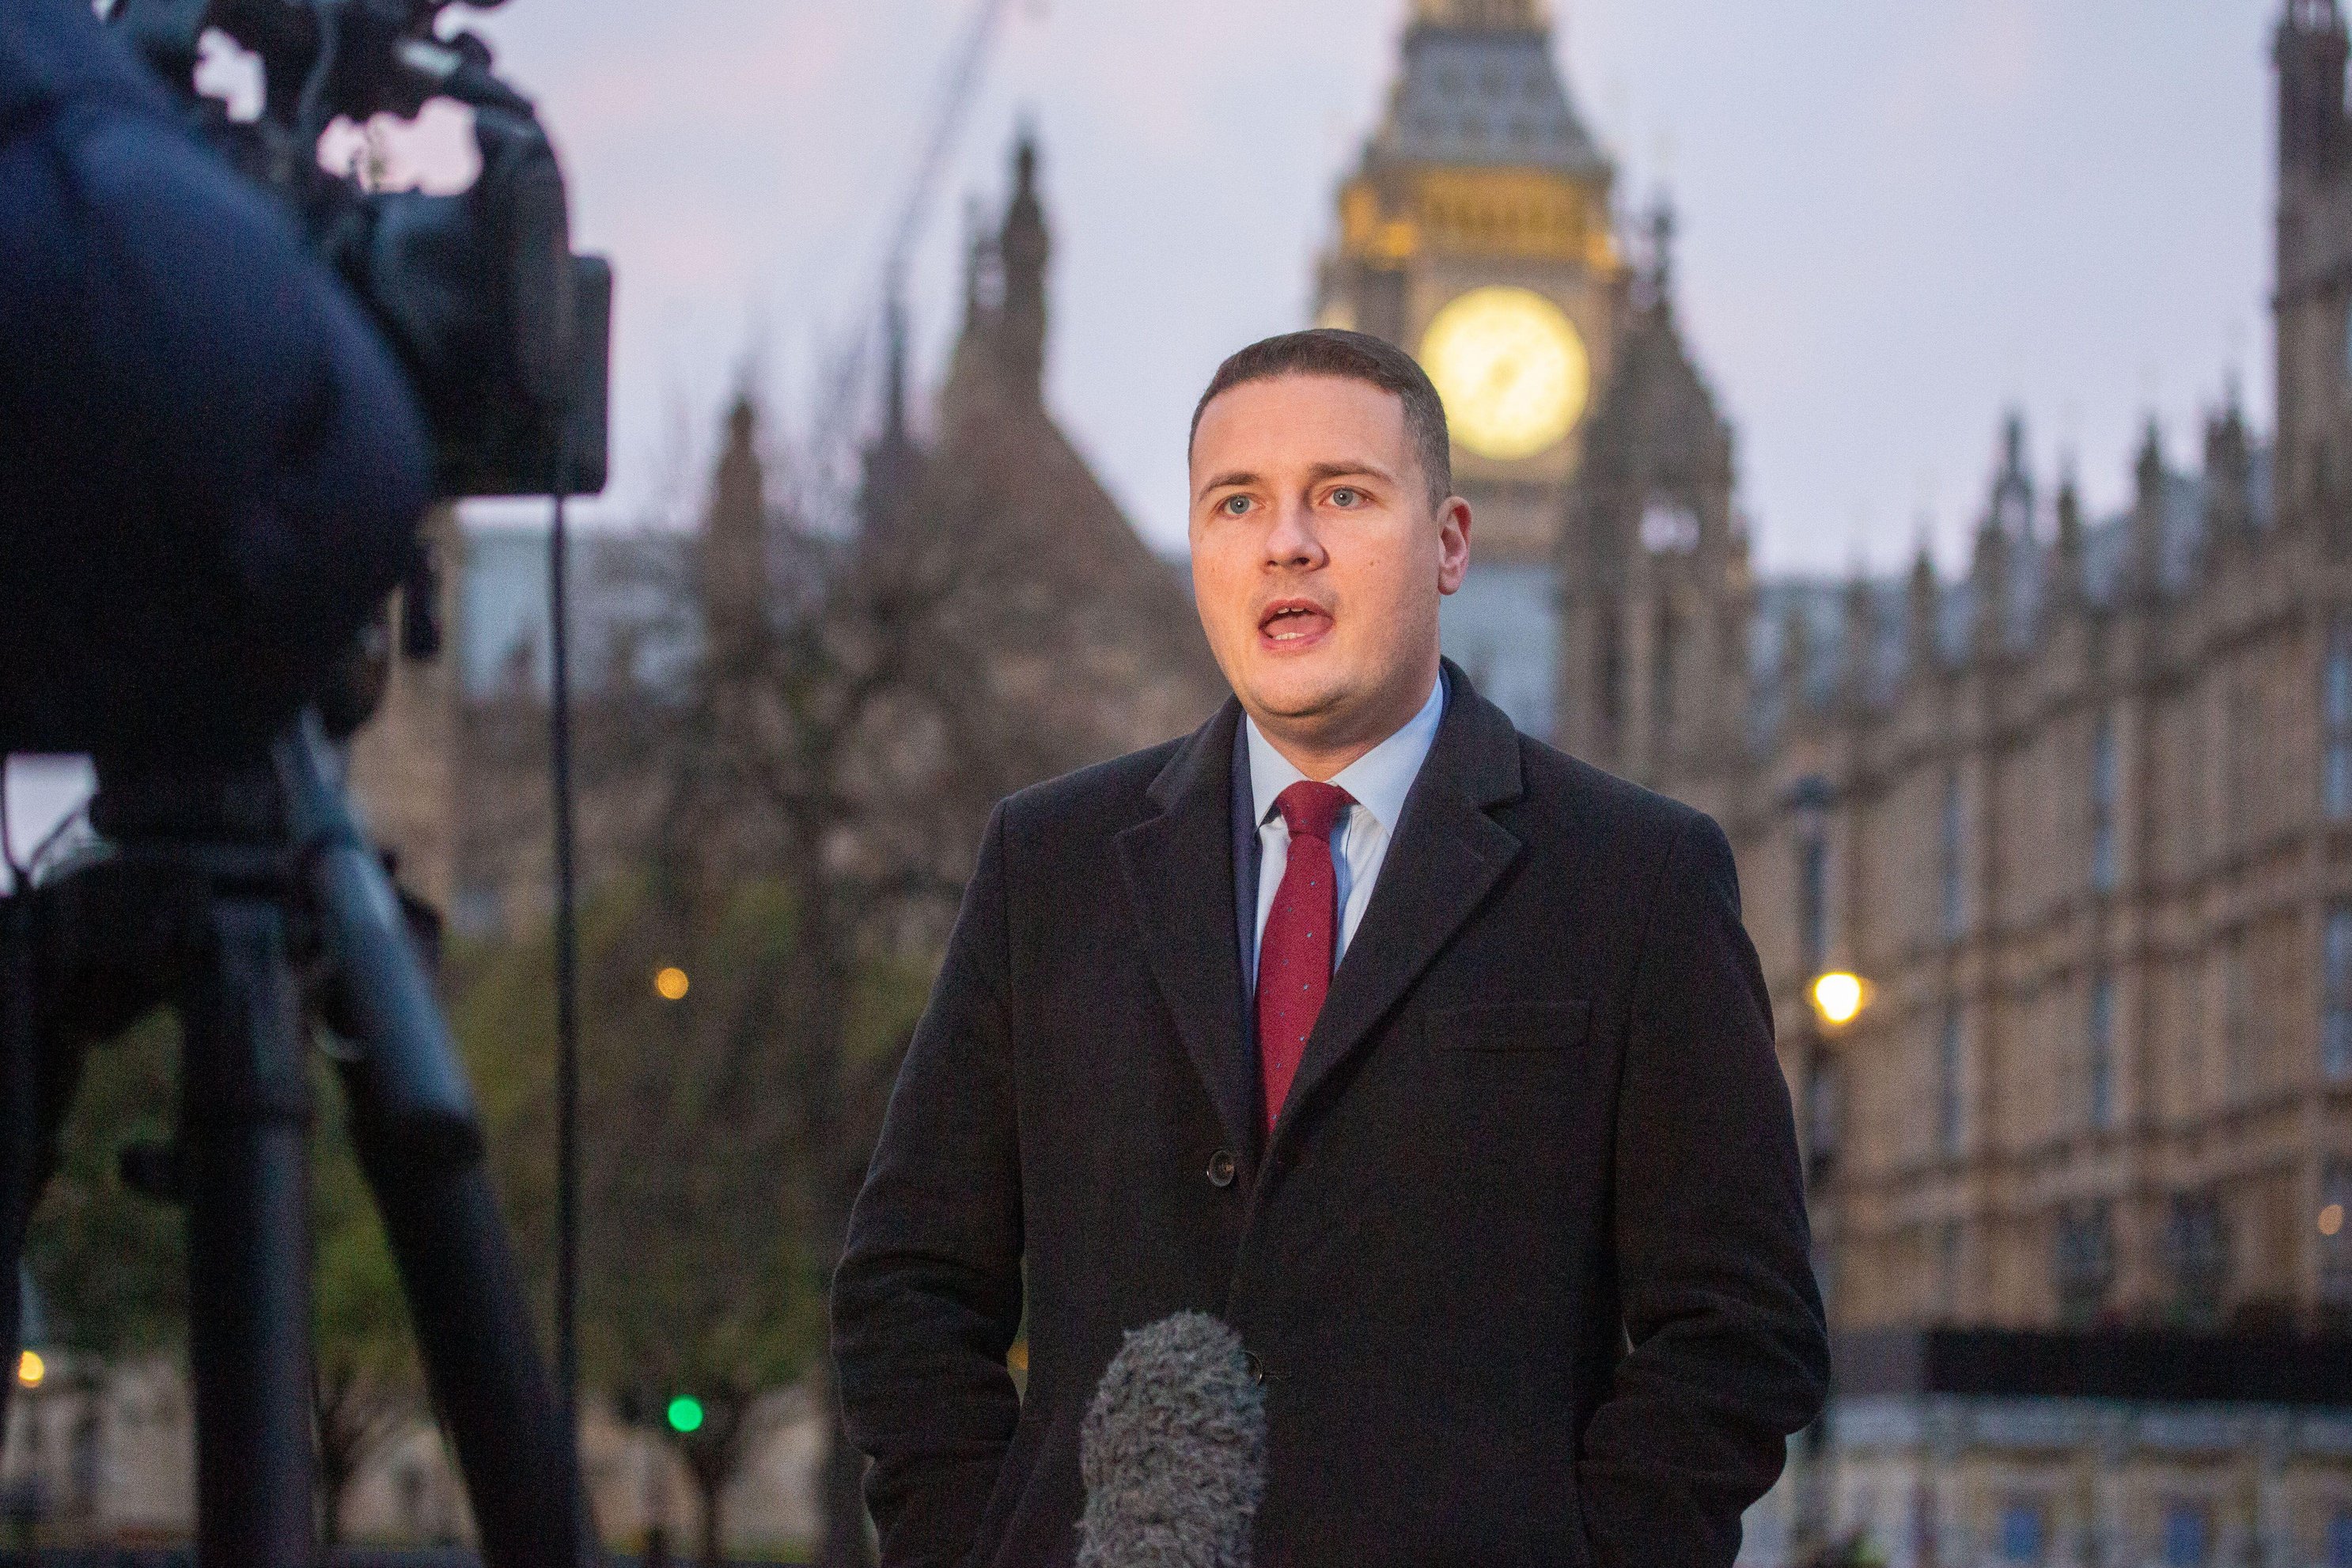 If Labour is elected, the public will expect immediate improvements: an end to the doctors’ strikes and rapidly falling waiting times. Wes Streeting is likely to be the man asked to deliver these things